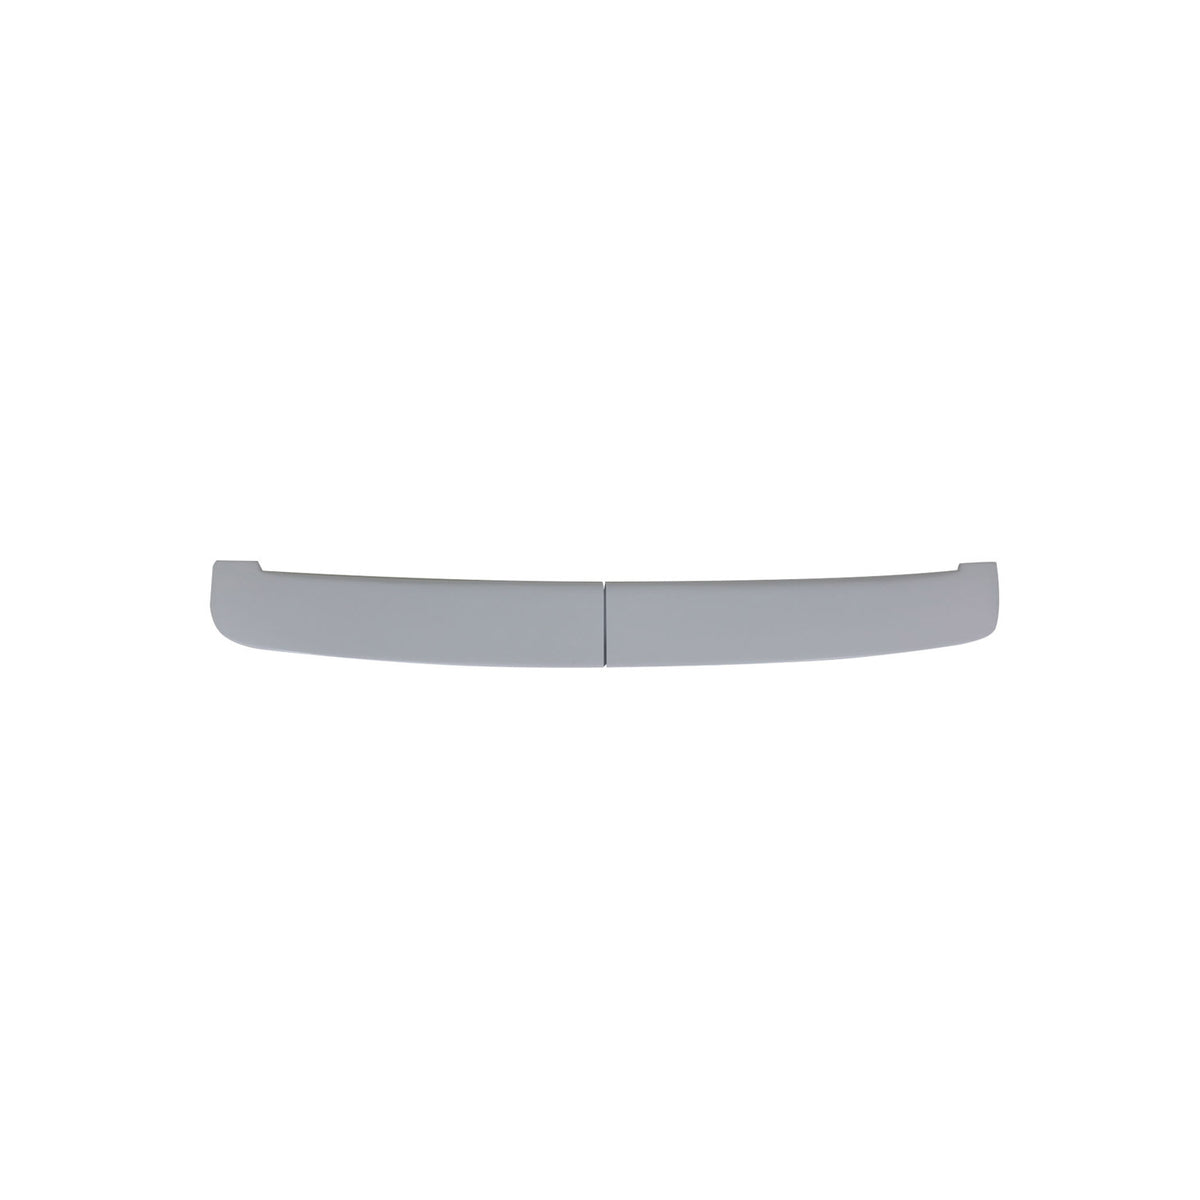 Spoiler for Ford Tourneo Custom wing rear primed 2 pieces